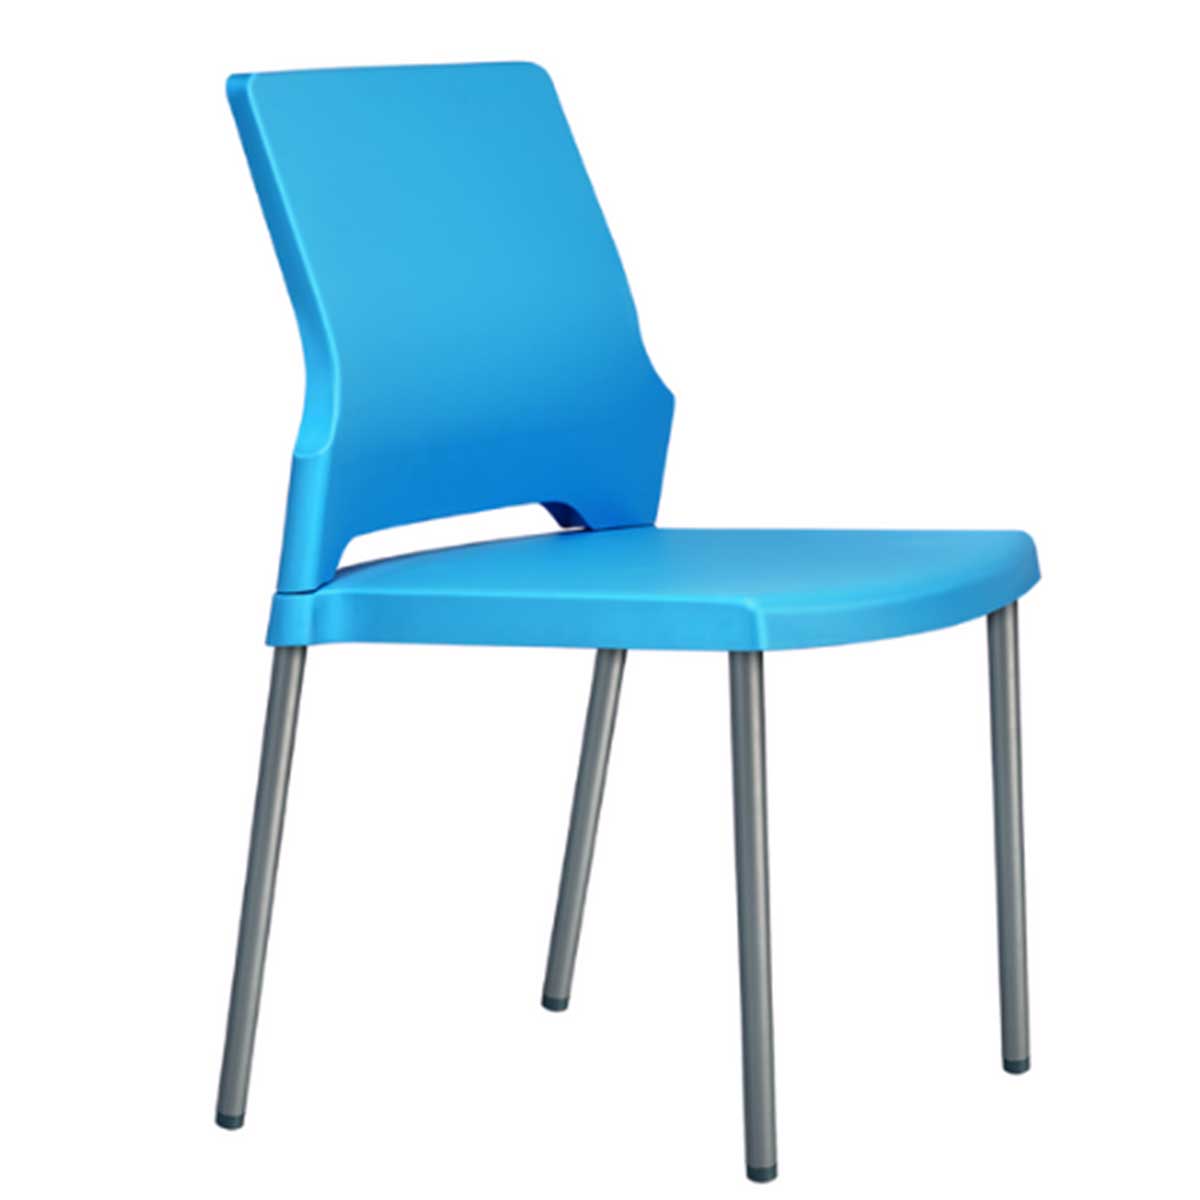 Cafeteria Chair Manufacturers, Suppliers in Preet Vihar